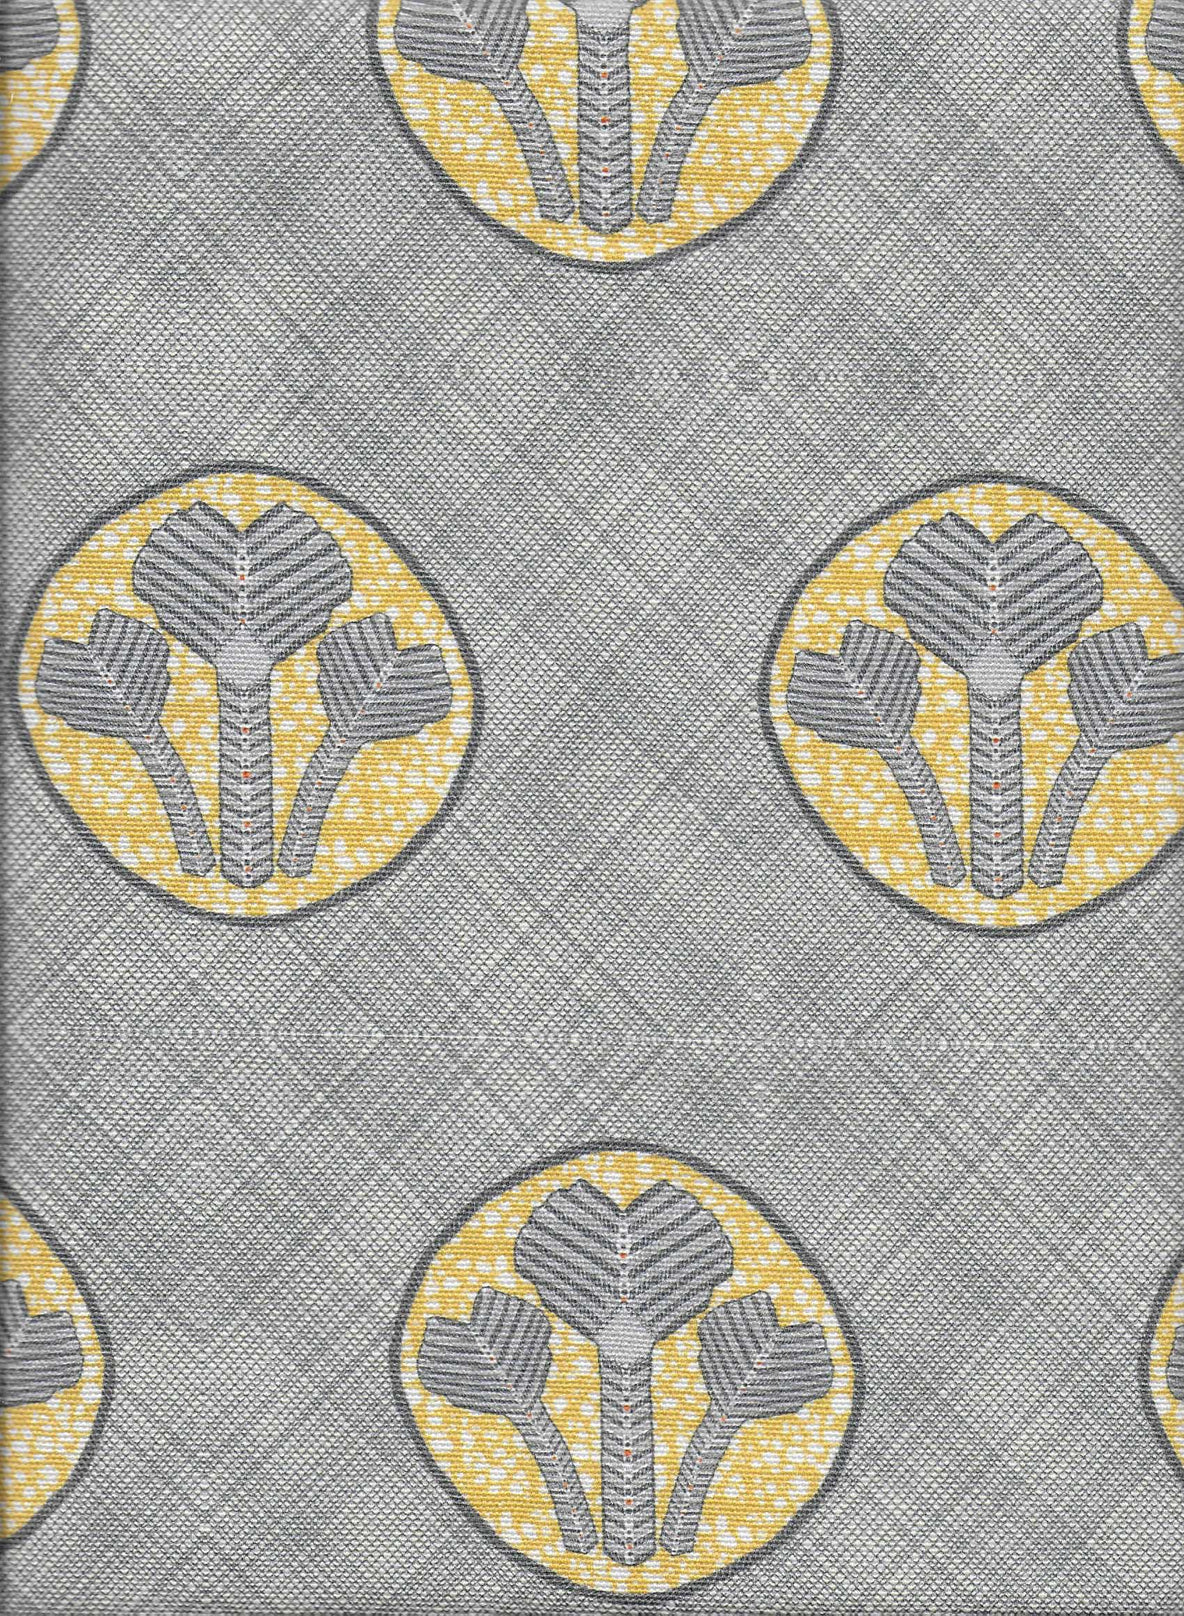 Detail of fabric in a repeating curvilinear floral print in yellow and gray on a gray field.